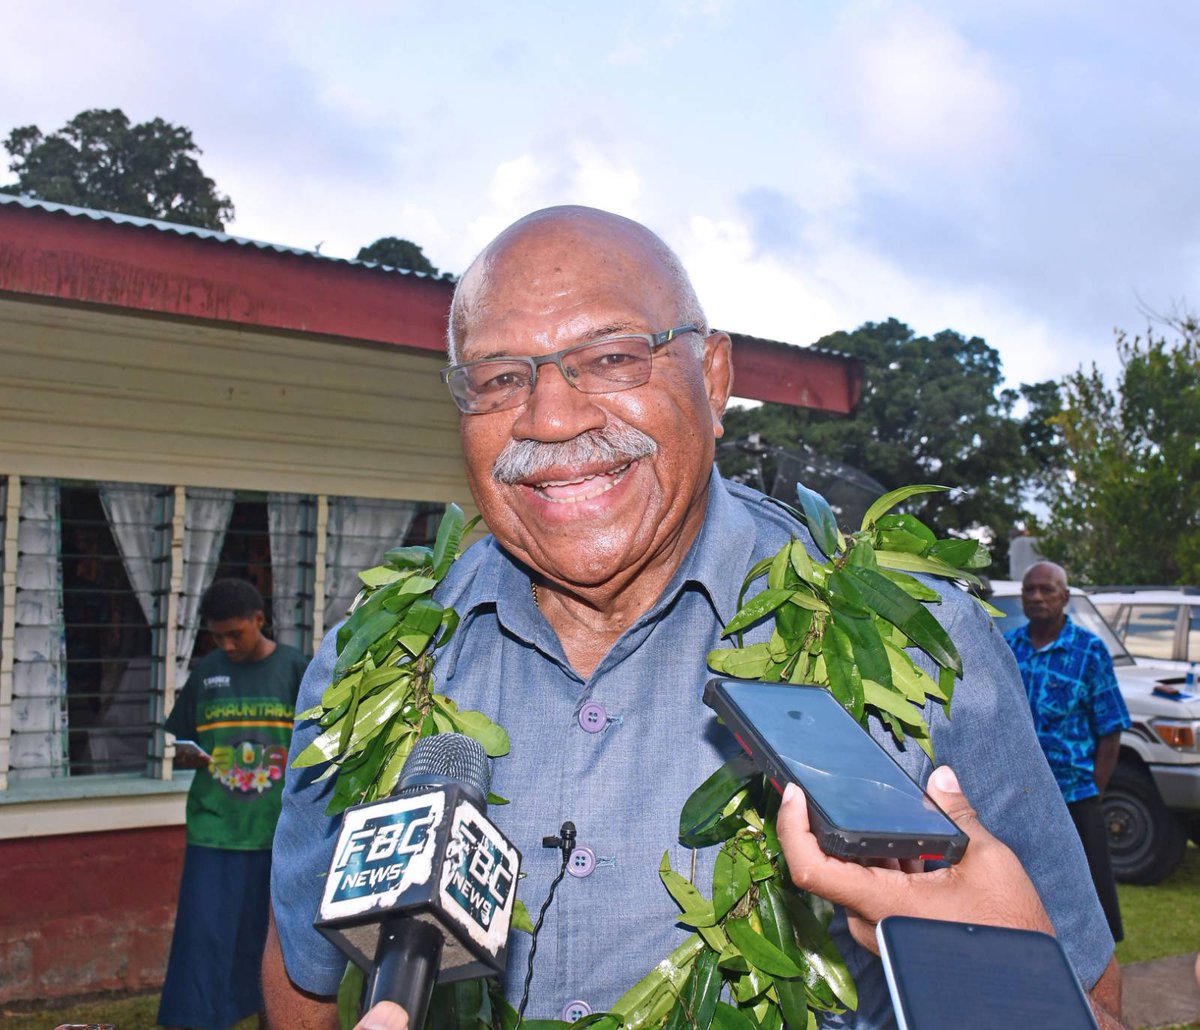 “Well, I’m still here, I’m ok,” was my comeback when journalists covering my tour of Vanua Levu informed me at Saolo village in Wainunu today that fake news had reported that I was supposed to be very ill and in life-support in hospital. #Fiji #fijinews @fiji_opm @FijiGovernment